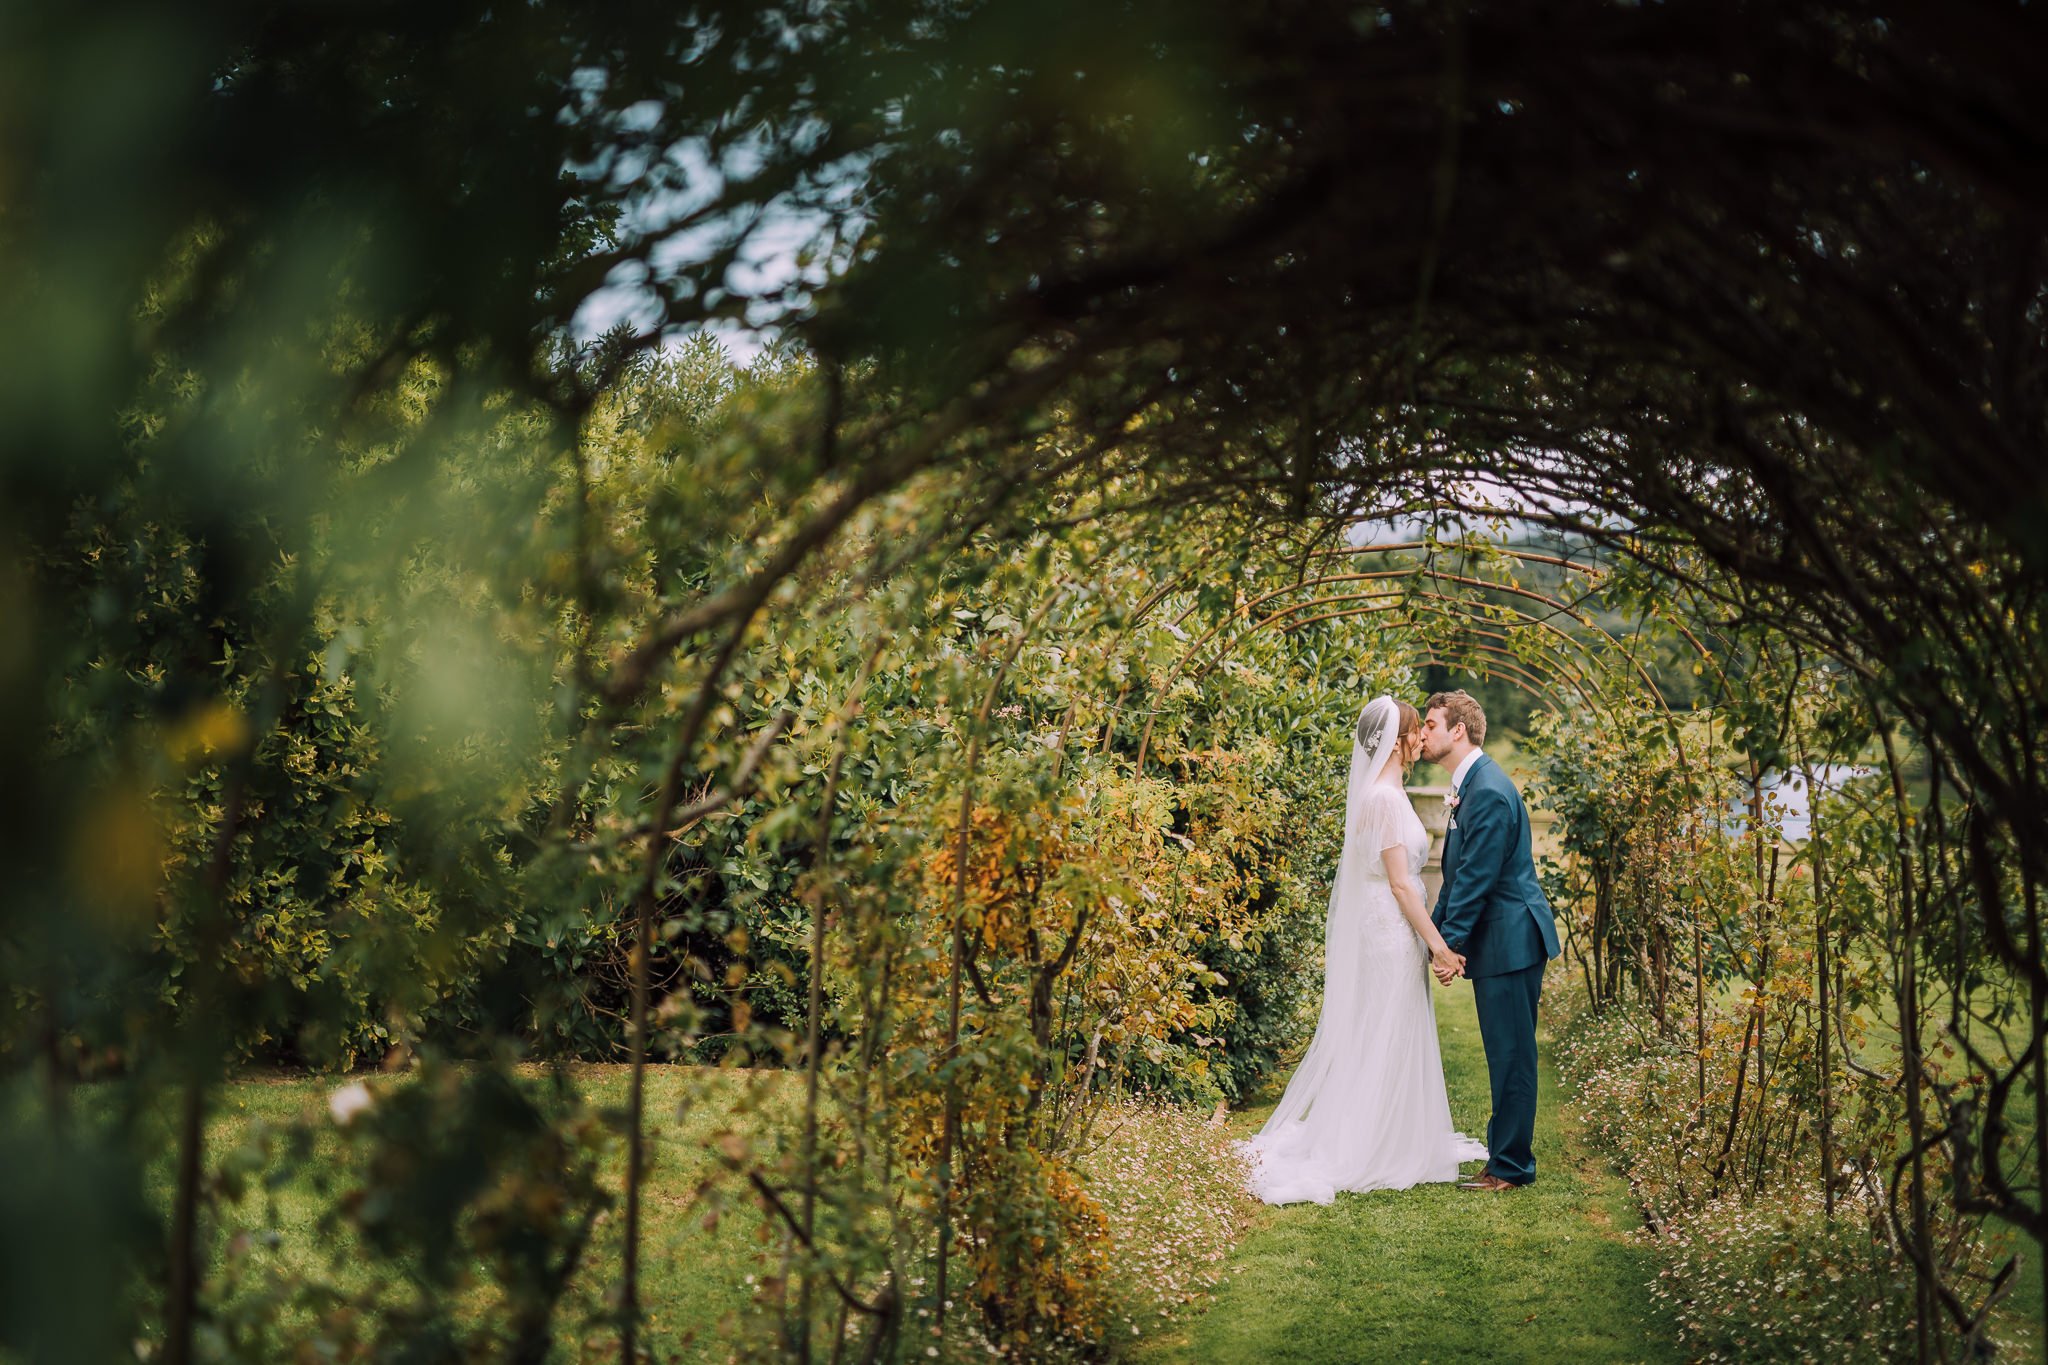  Bride and Groom kiss in the grounds of  Wadhurst castle wedding venue 